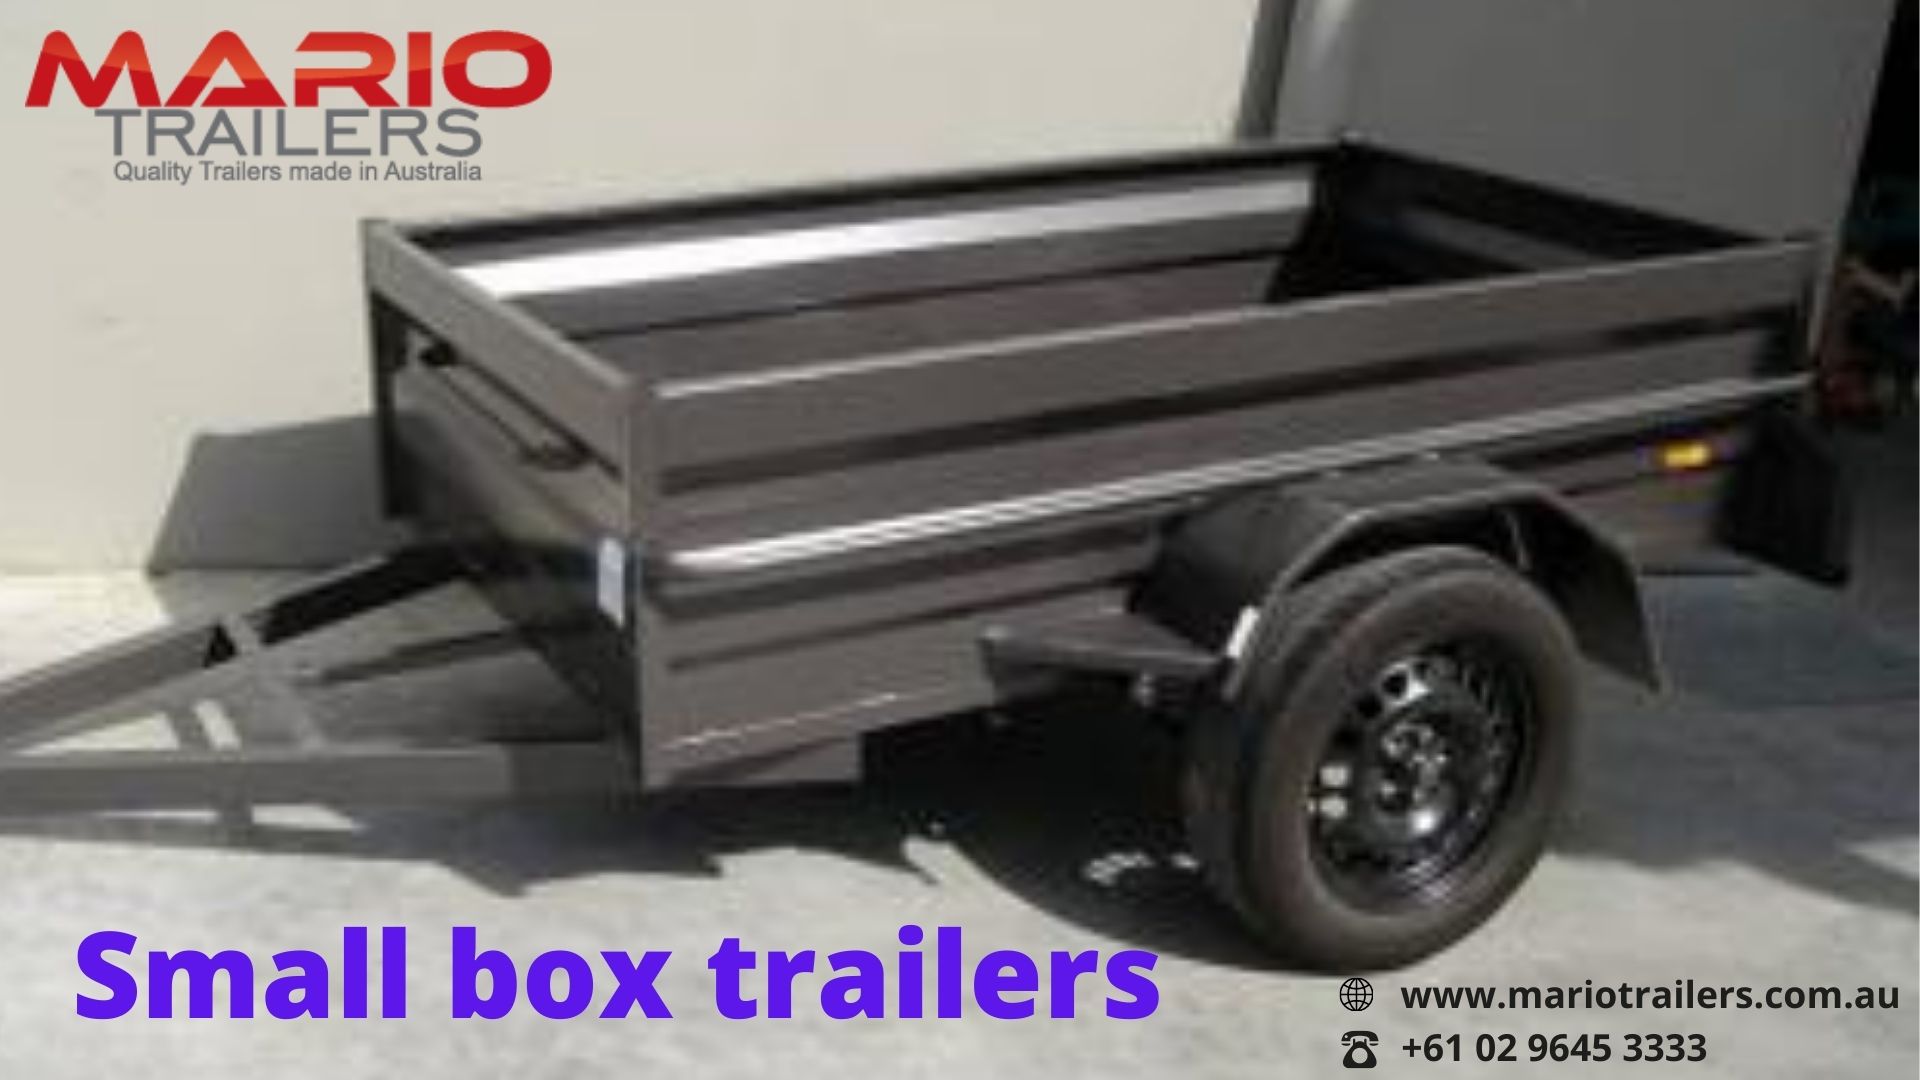 4 Questions Will Make Your Box Trailer Purchase Easy!